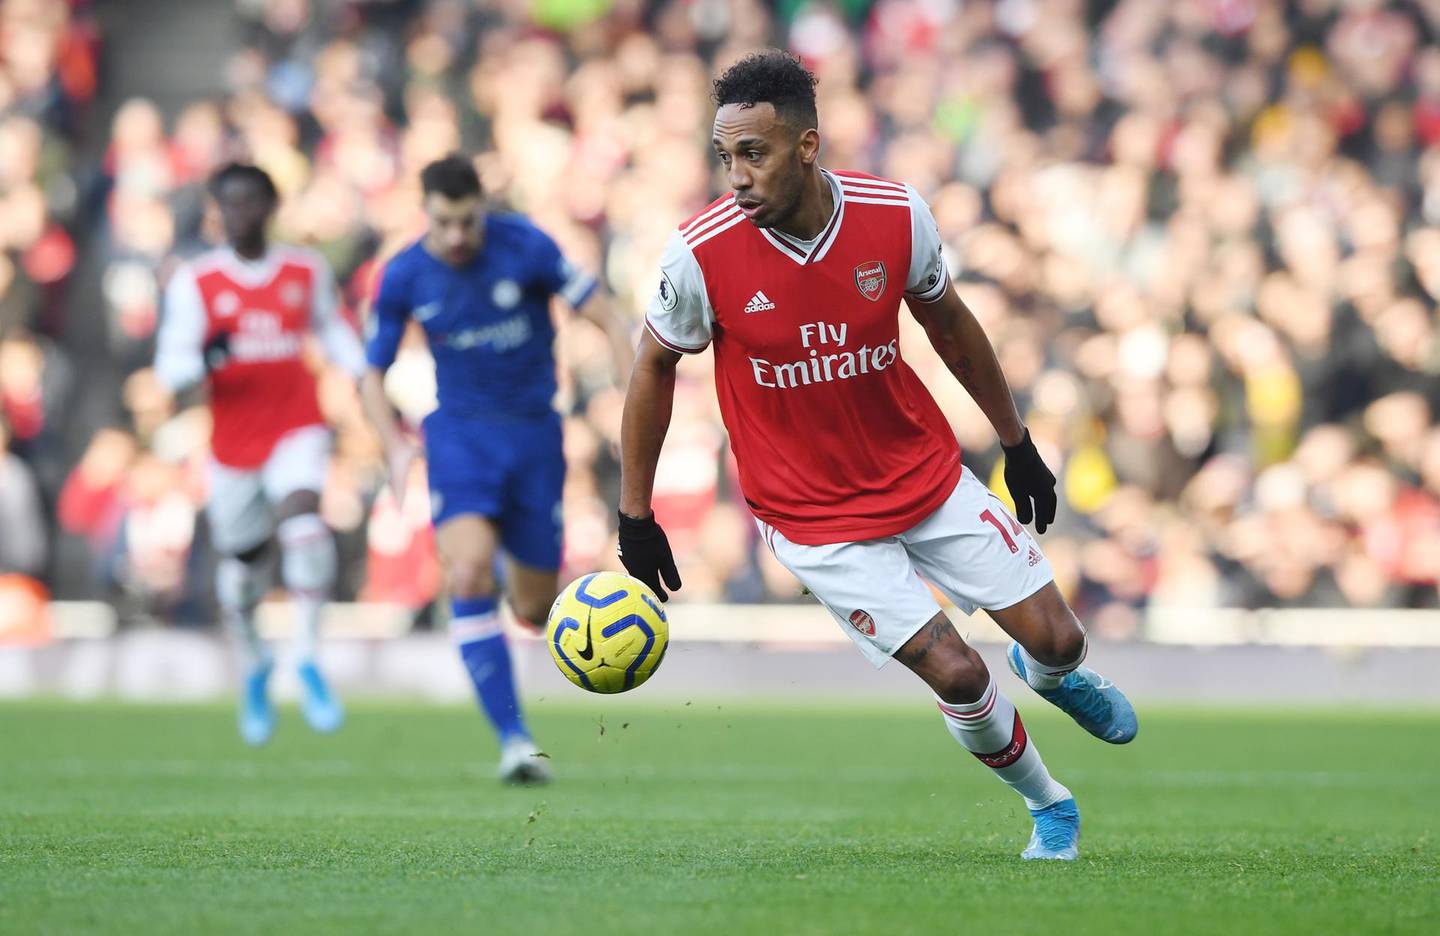 epa08093780 Arsenal's Pierre-Emerick Aubameyang in action during the English Premier League soccer match between Arsenal FC and Chelsea FC held at the Emirates stadium in London, Britain, 29 December 2019.  EPA/NEIL HALL EDITORIAL USE ONLY.  No use with unauthorized audio, video, data, fixture lists, club/league logos or 'live' services. Online in-match use limited to 120 images, no video emulation. No use in betting, games or single club/league/player publications.